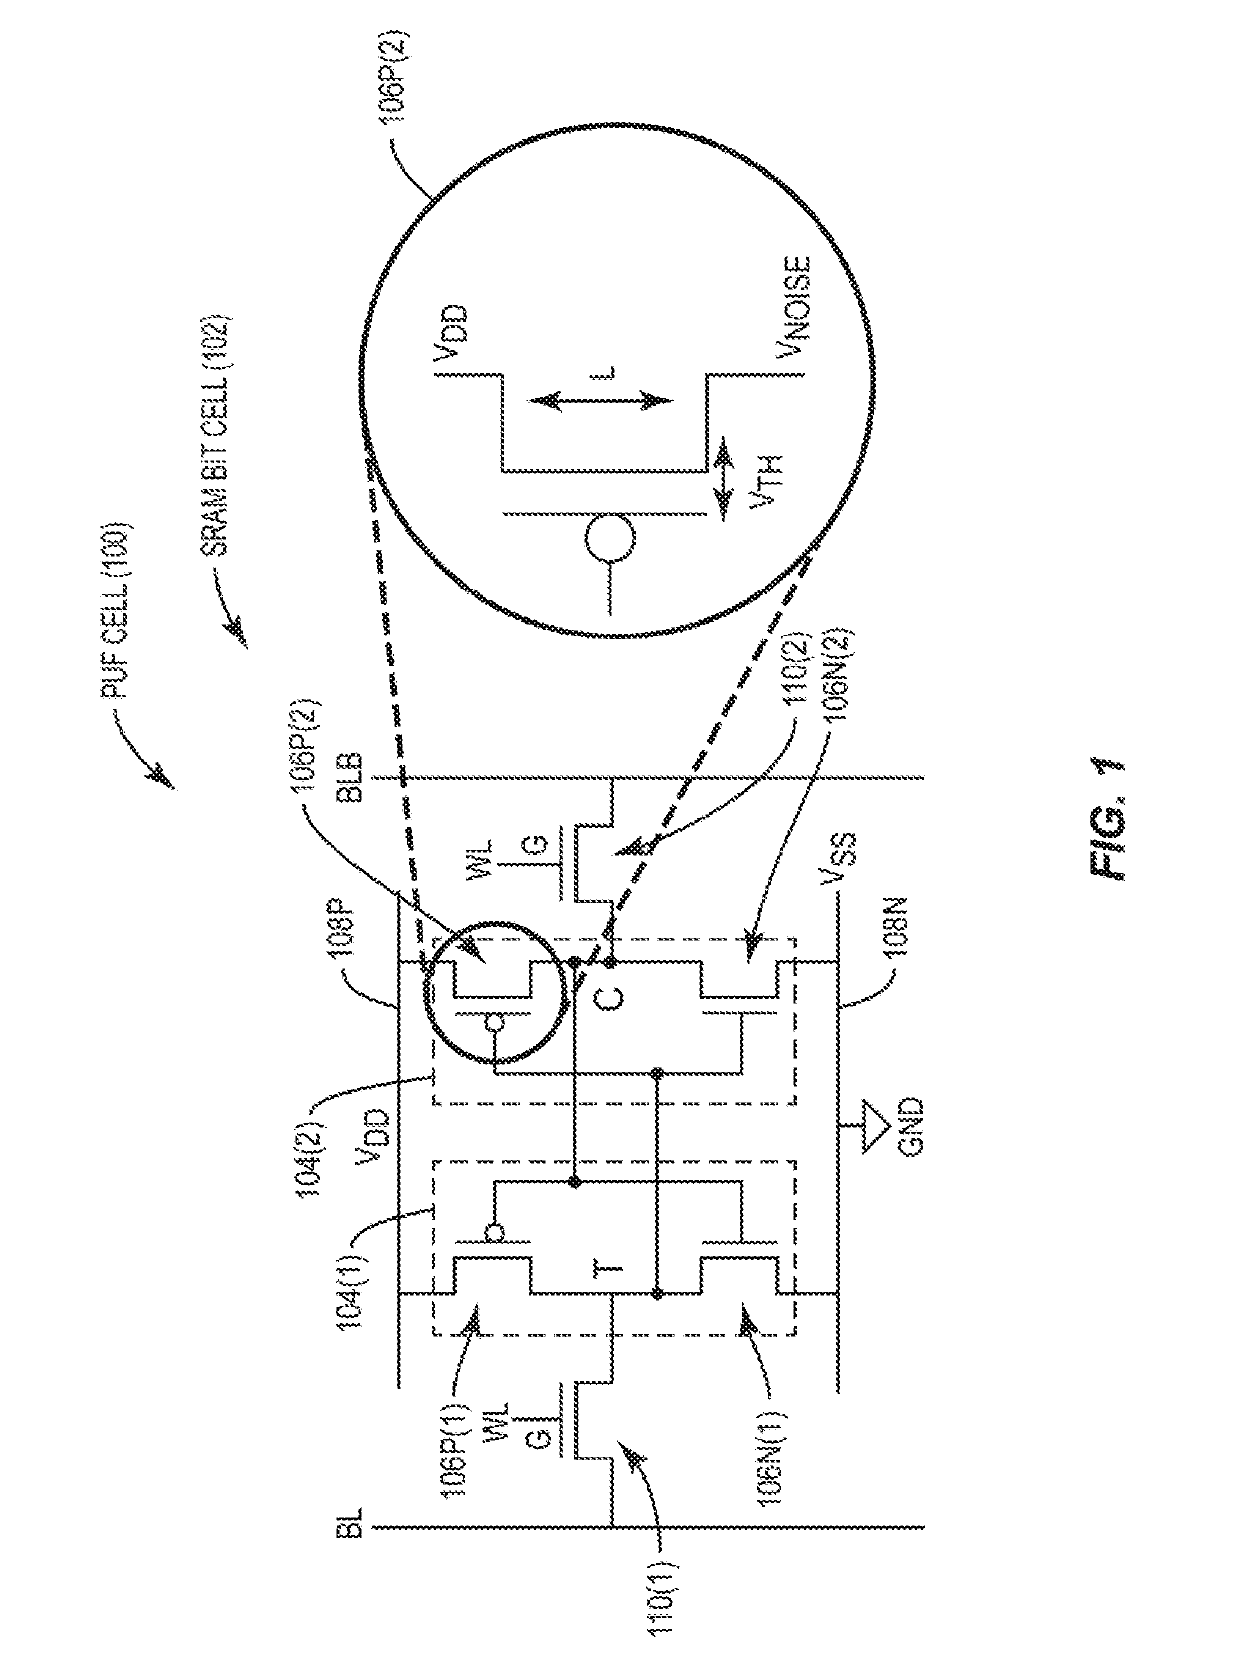 Physically unclonable function (PUF) memory employing static random access memory (SRAM) bit cells with added passive resistance to enhance transistor imbalance for improved PUF output reproducibility